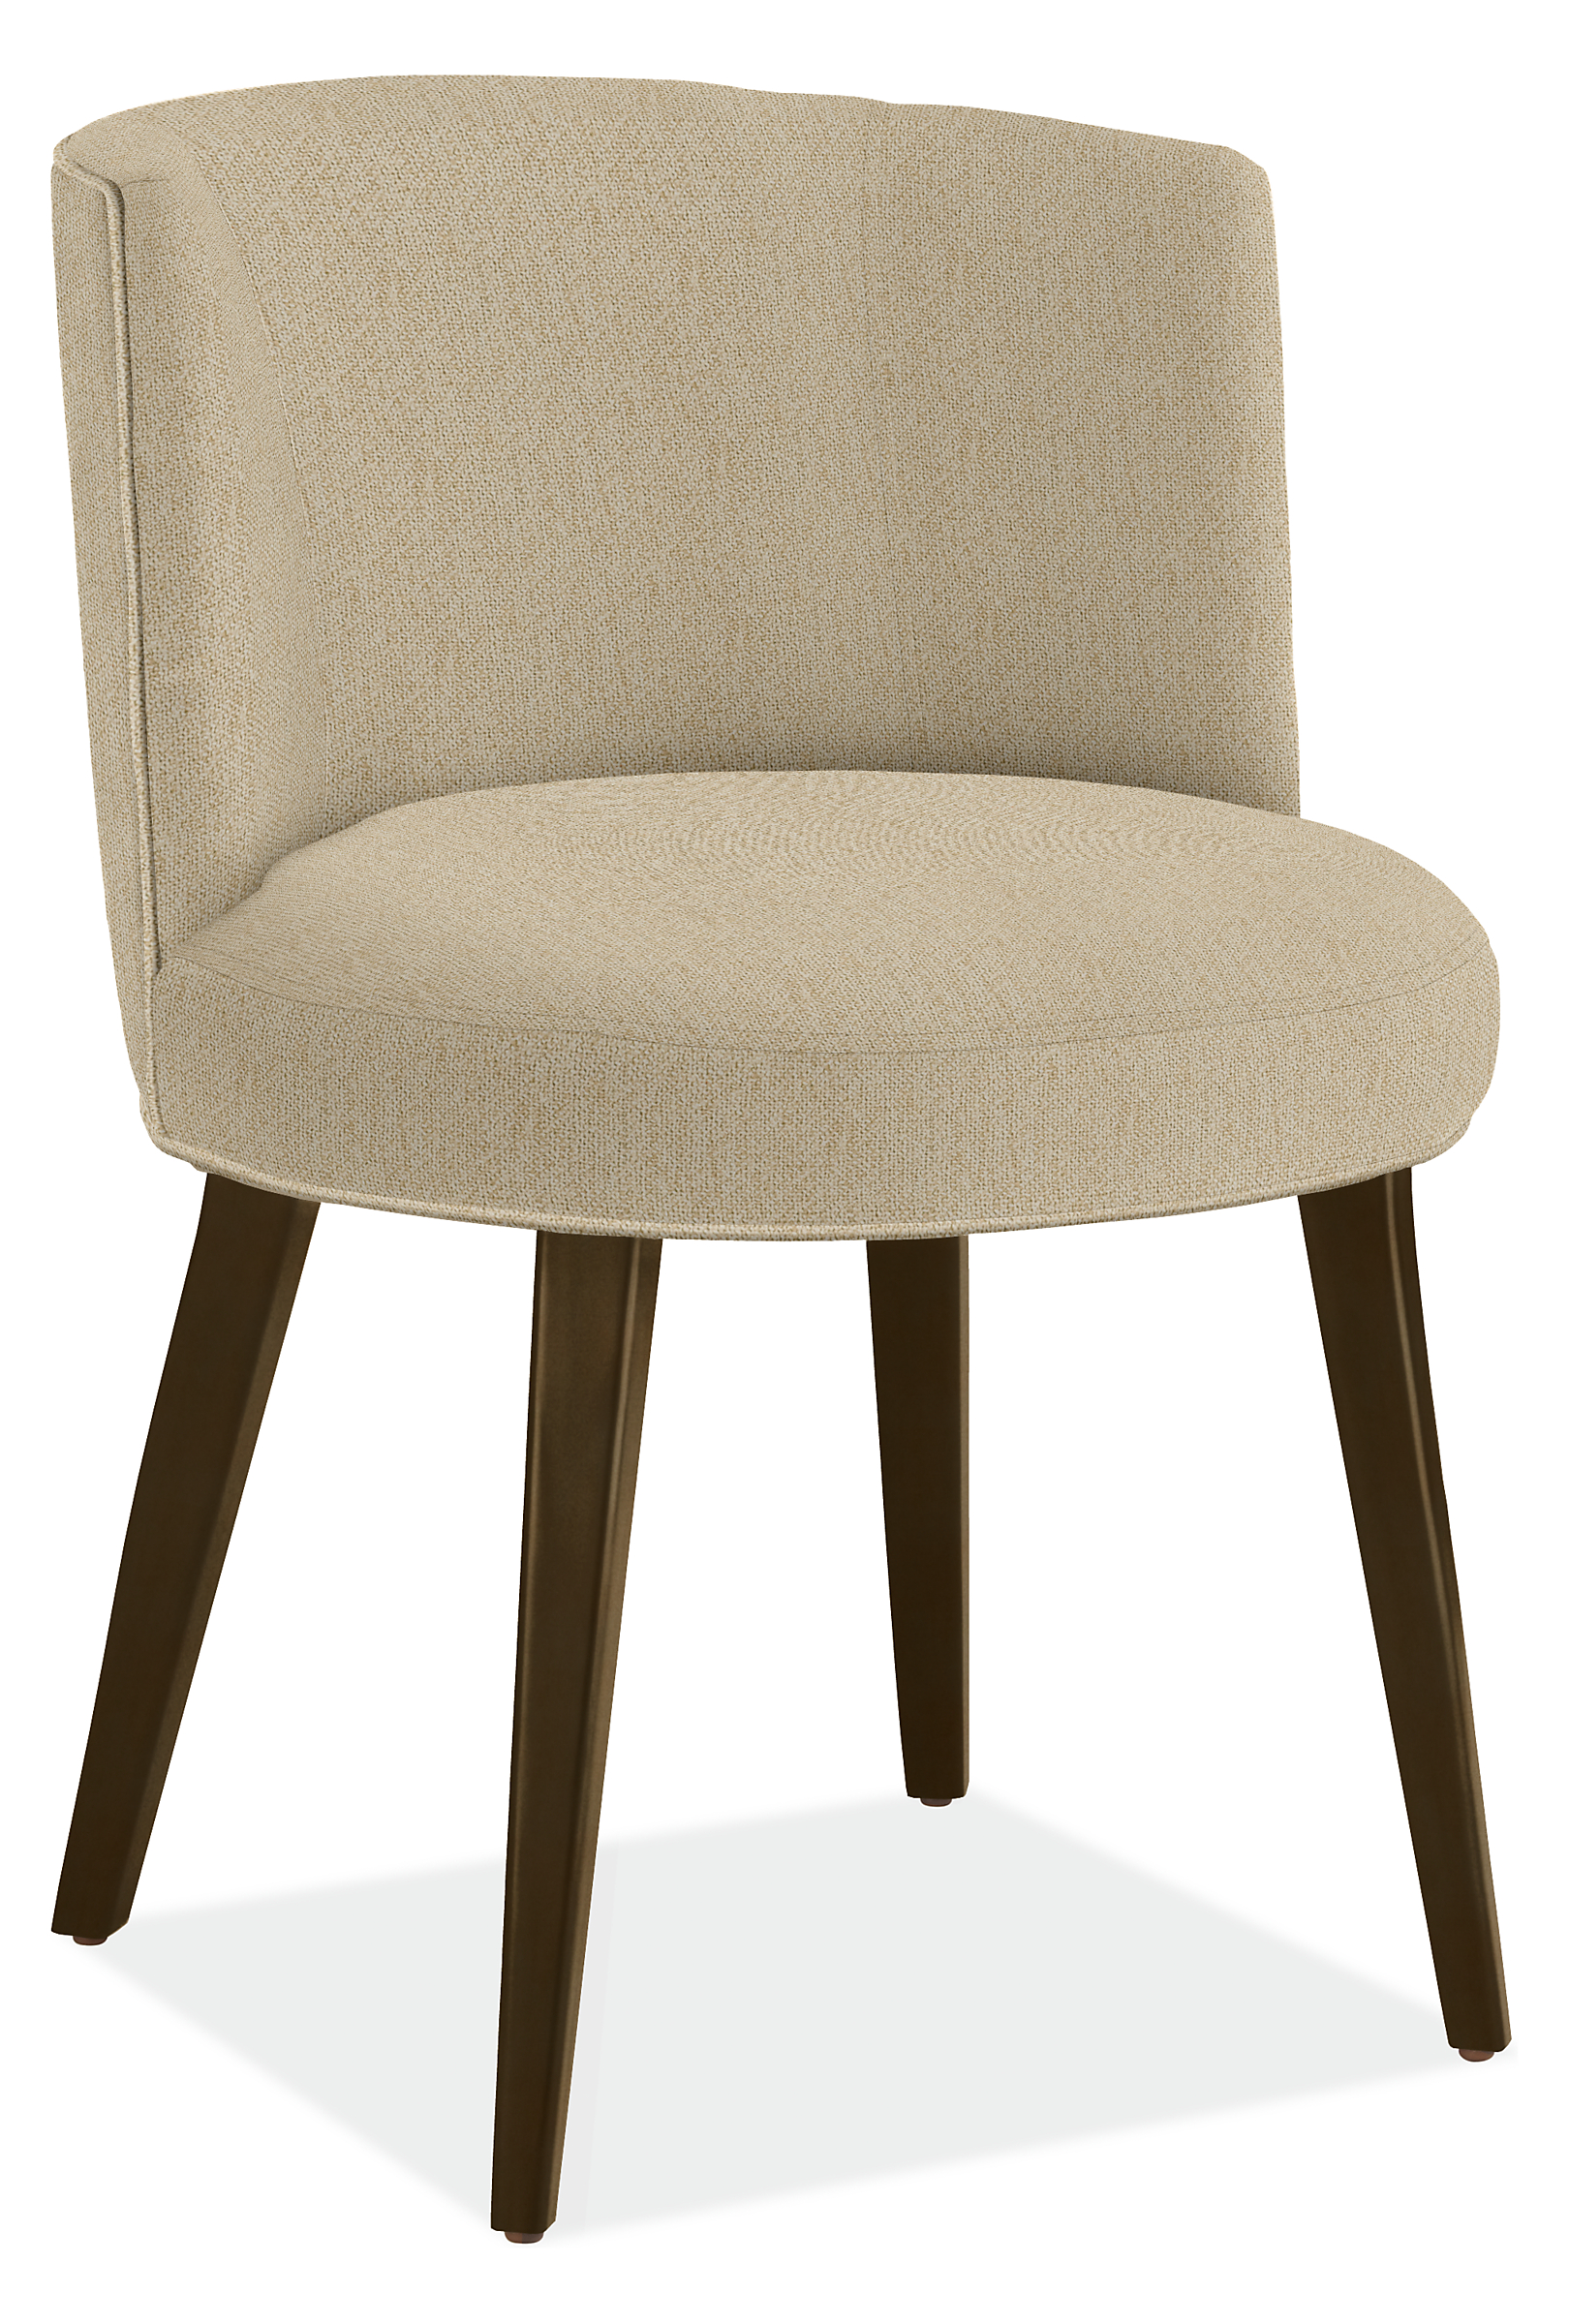 June Side Chair in Tatum Natural with Charcoal Legs